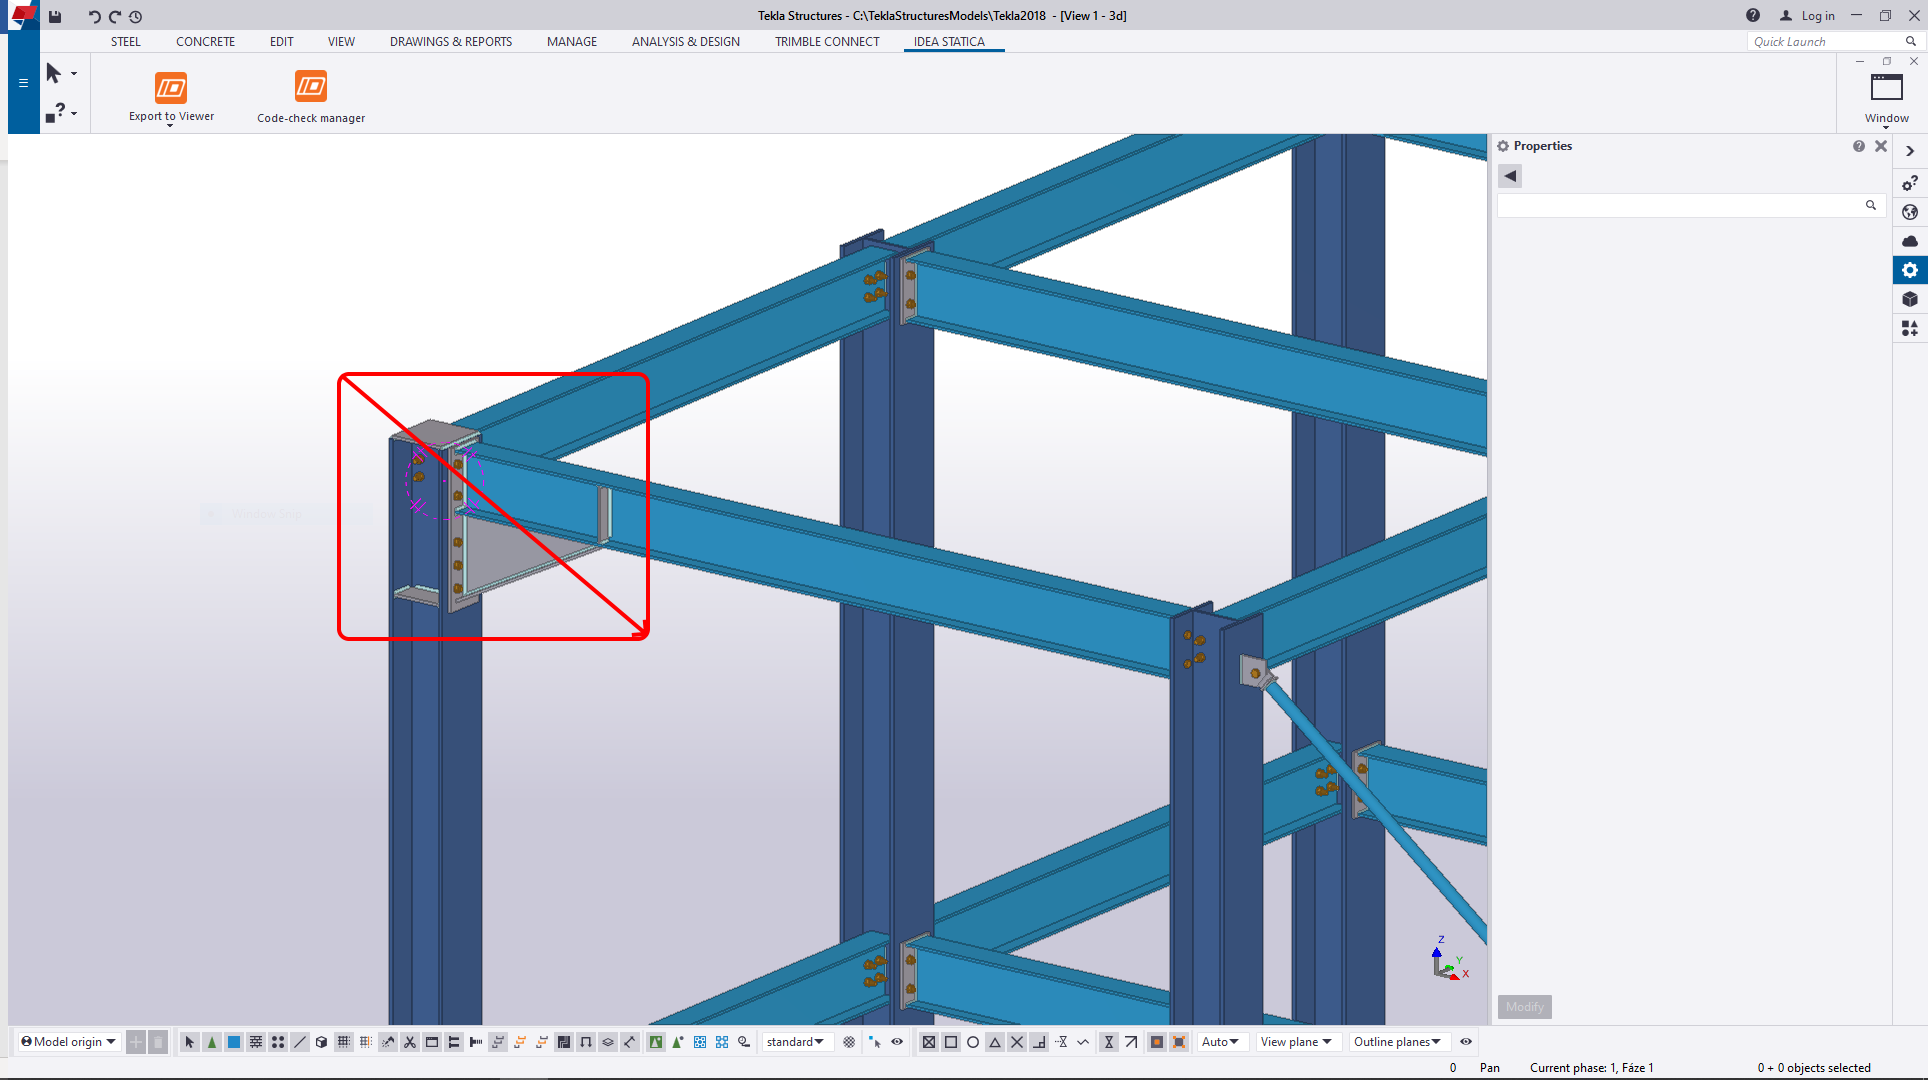 IDEA StatiCa Viewer for Tekla Structures